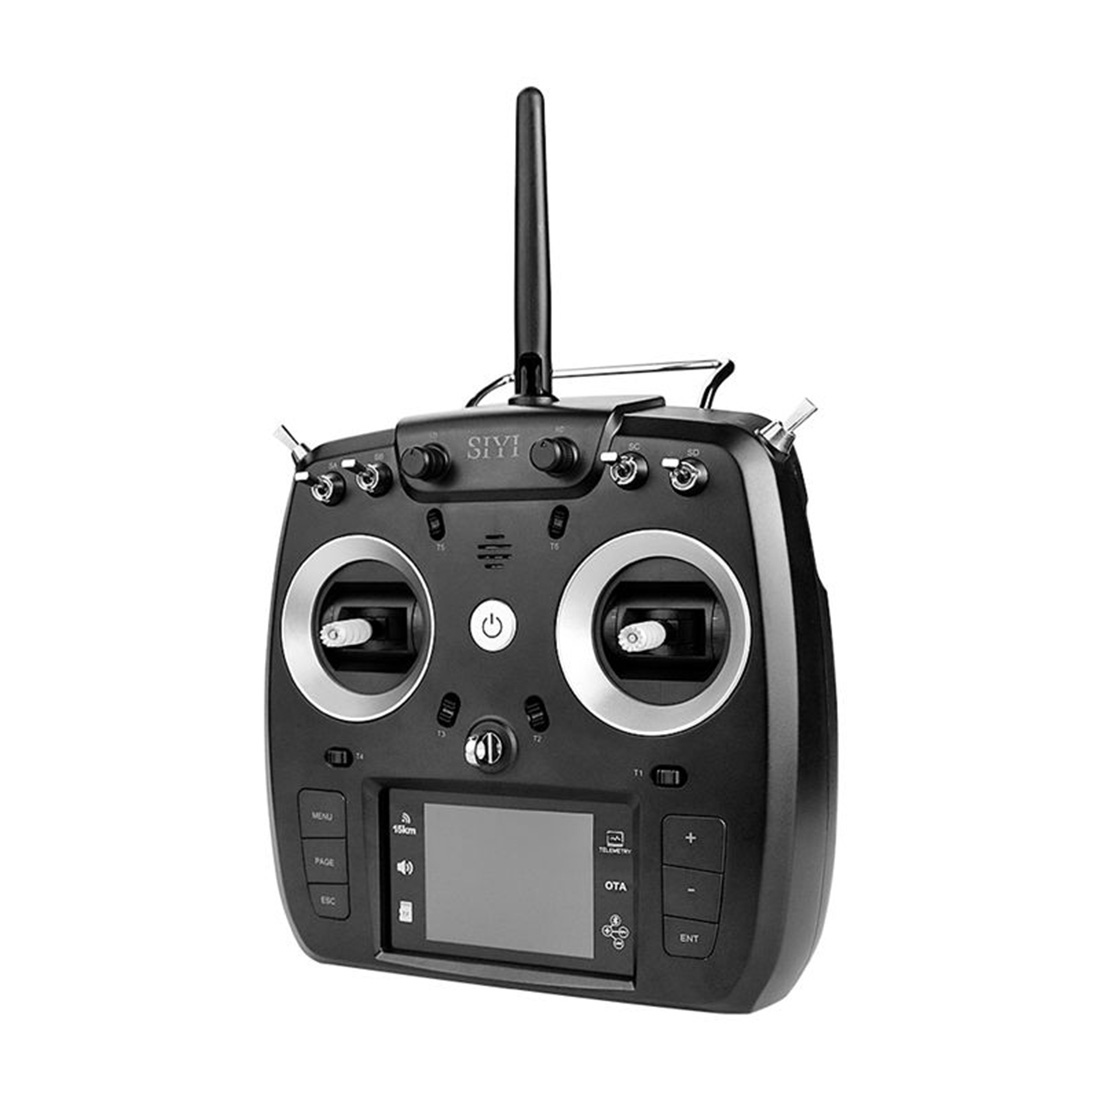 SIYI FT24 2.4GHz 12CH 15KM Long Range Transmitter Remote Controller for